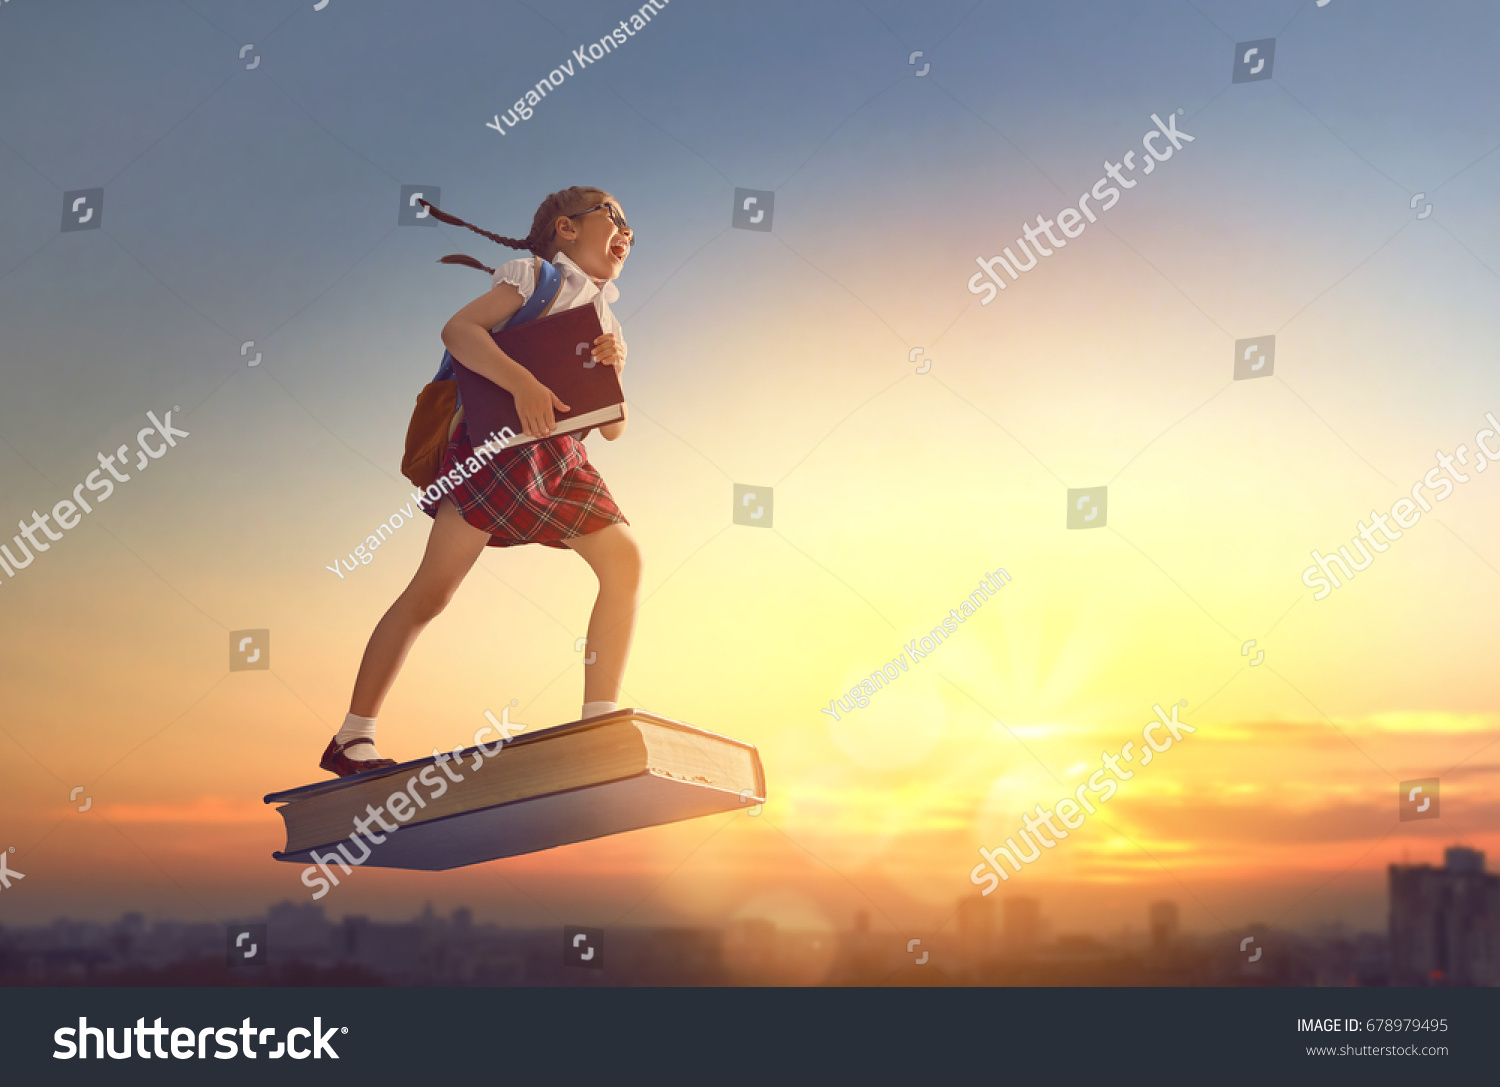 Back to school! Happy cute industrious child flying on the book on background of sunset urban landscape. Concept of education and reading. The development of the imagination. #678979495